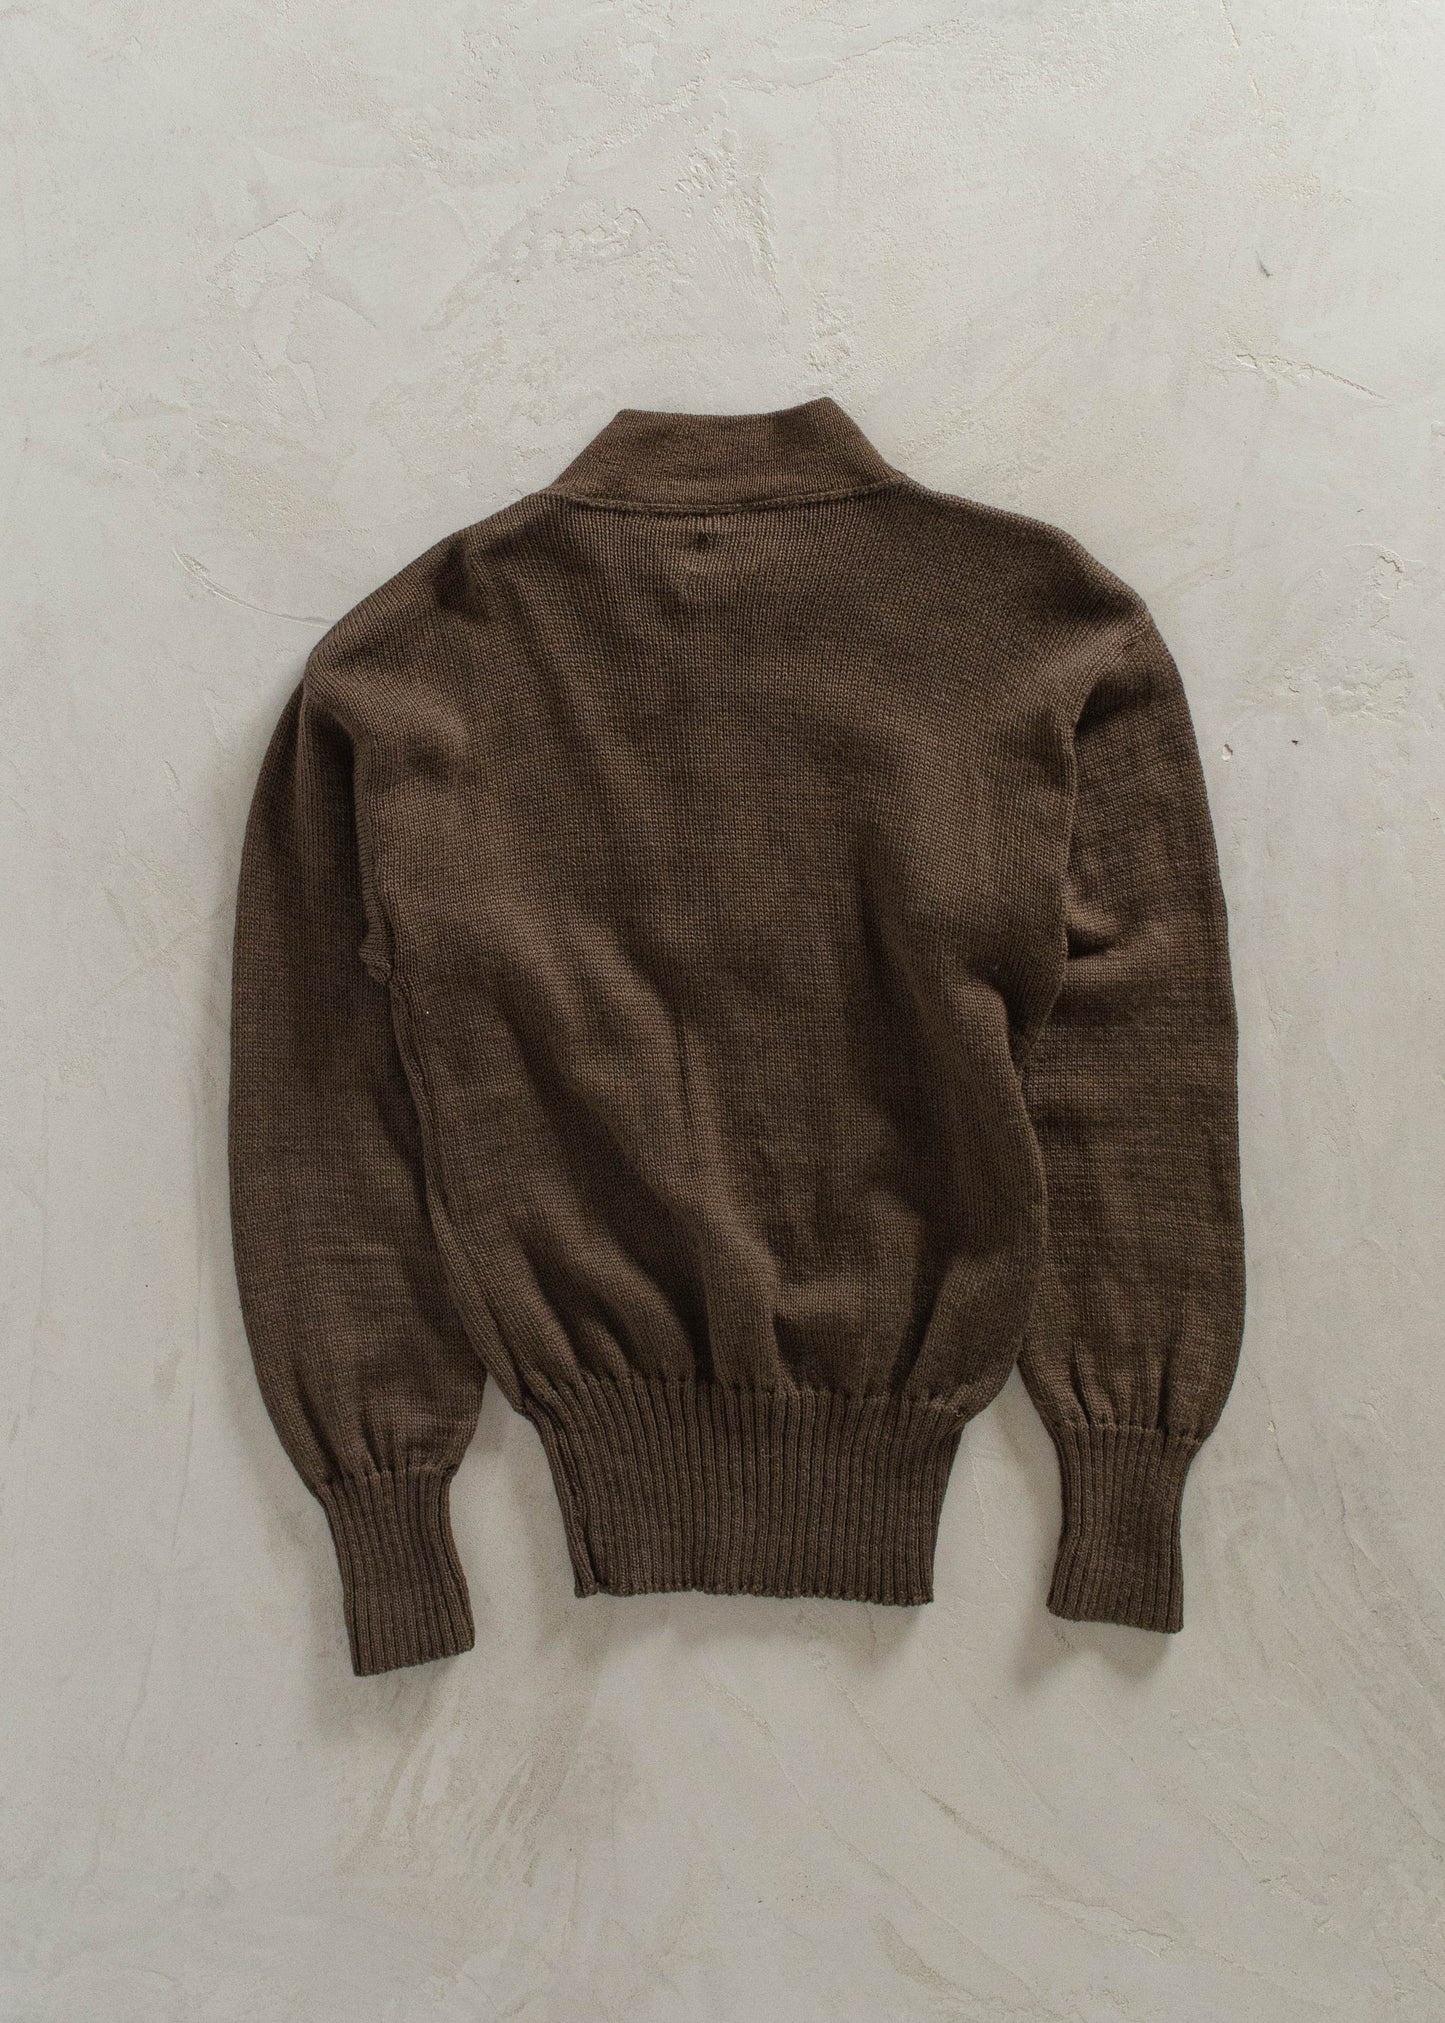 1980s Military Wool Pullover Knit Size S/M